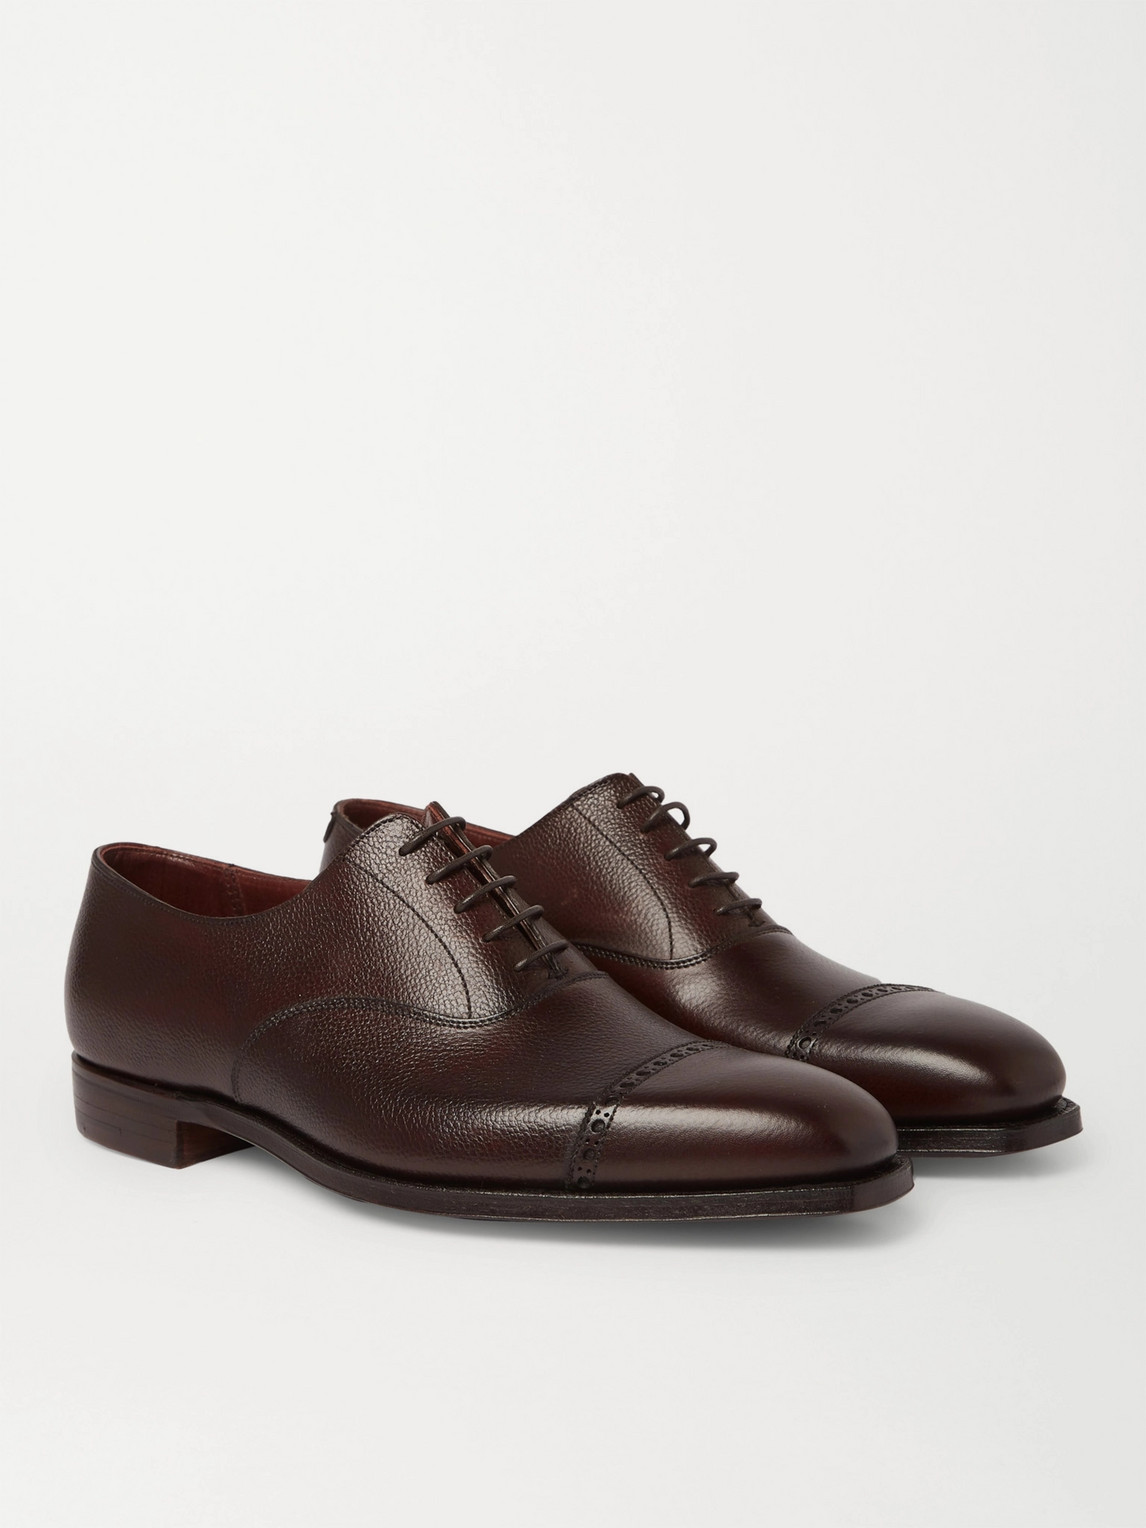 George Cleverley Charles Cap-toe Full-grain Leather Oxford Shoes In Brown